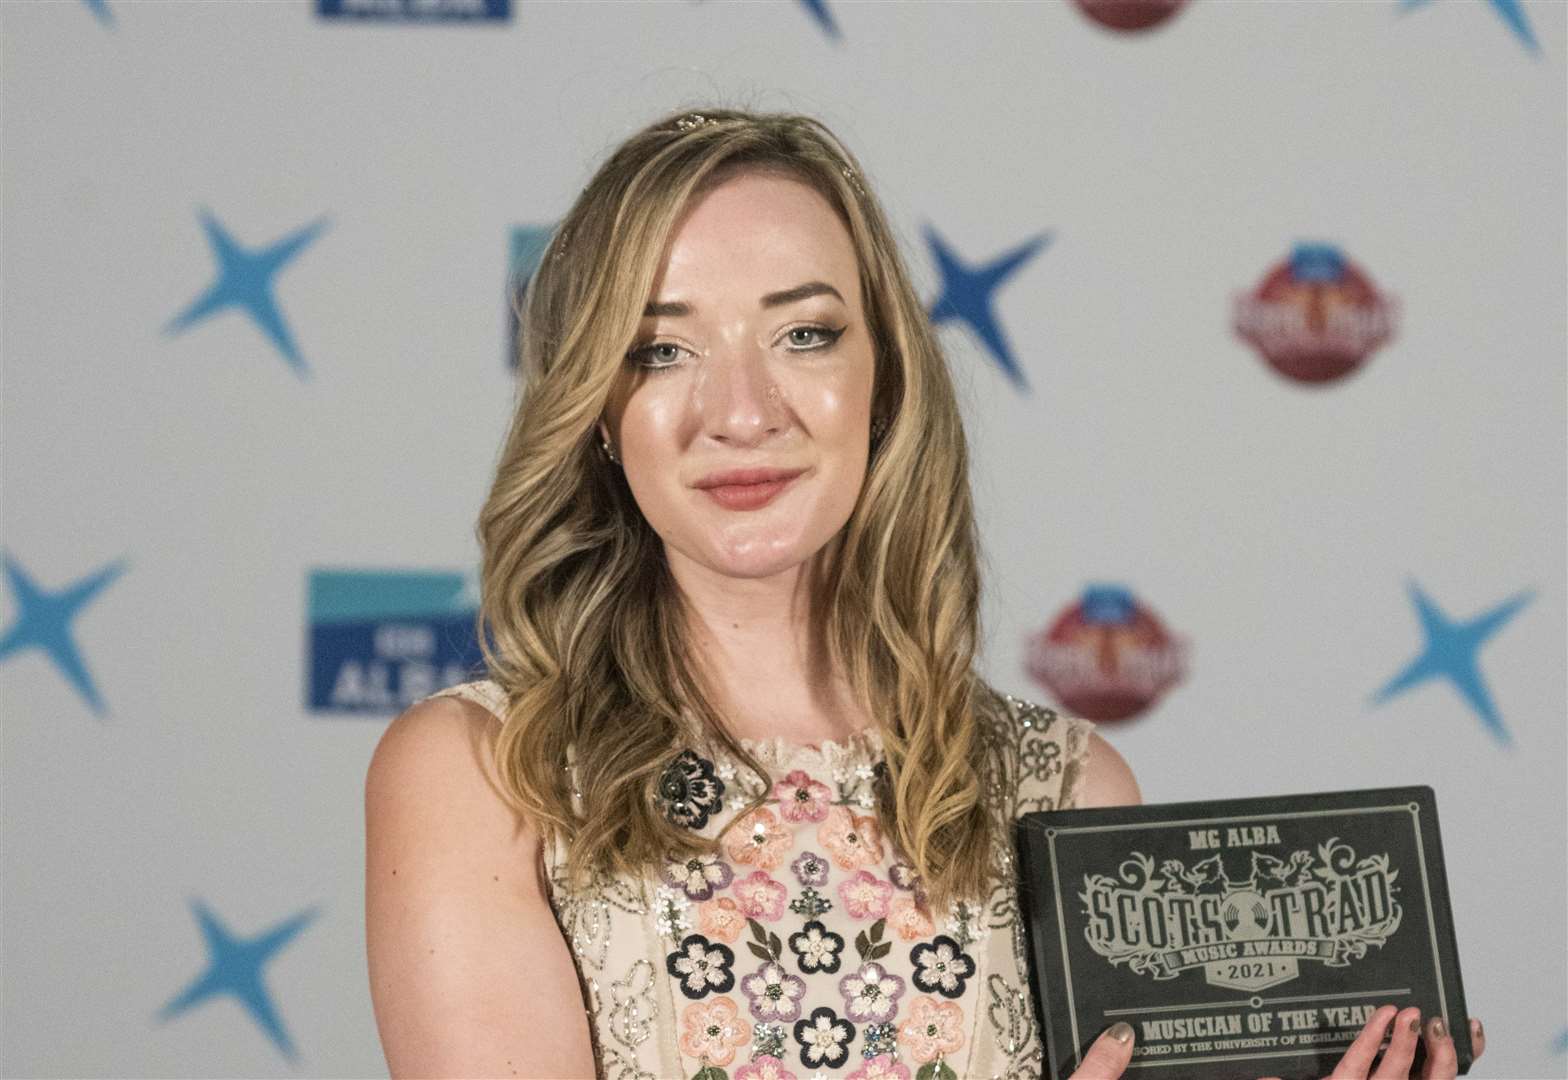 Huntly singer, Iona Fyfe hits a high note at ALBA Scots Trad Music Awards